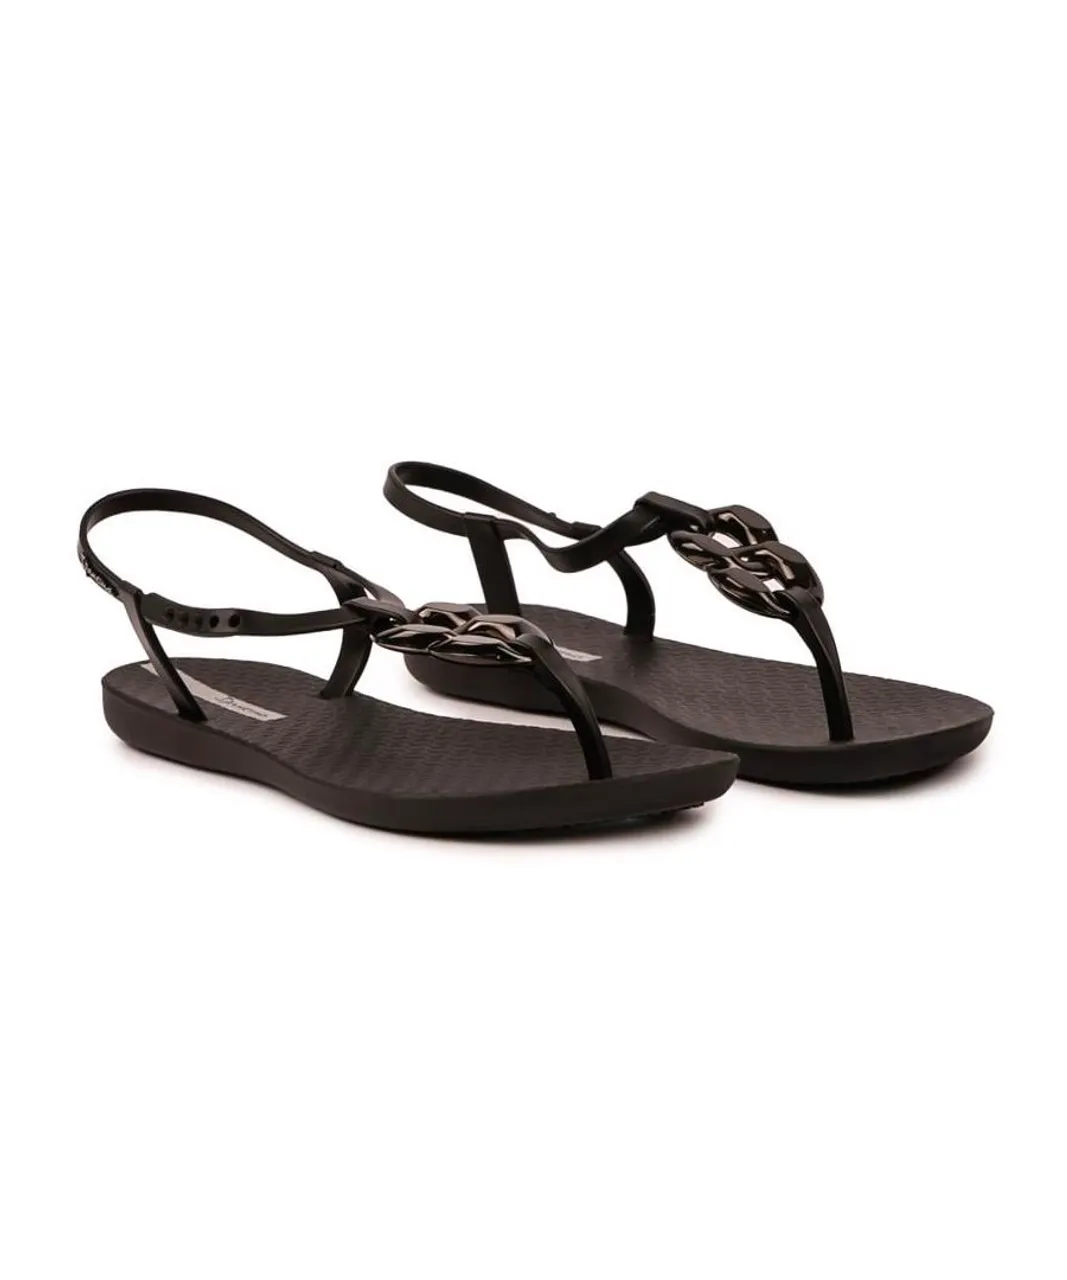 Ipanema Womens Connect Sandals - Black Rubber